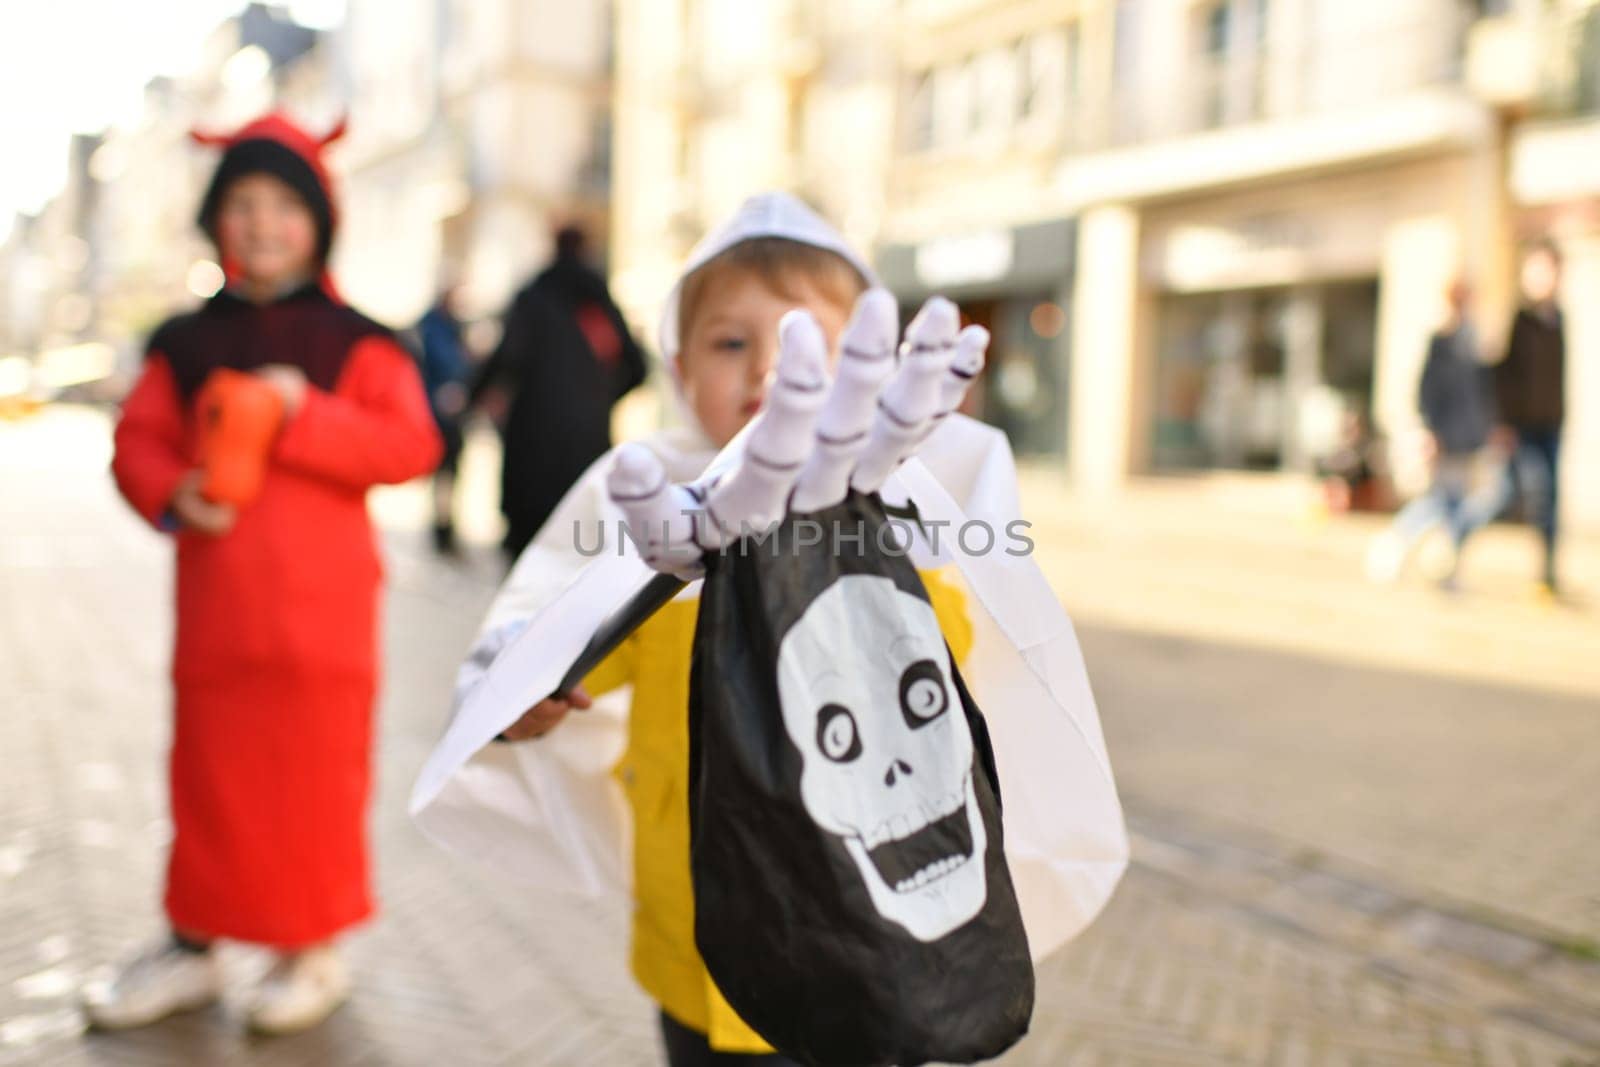 Children dressed up in the city on Halloween asking for candy